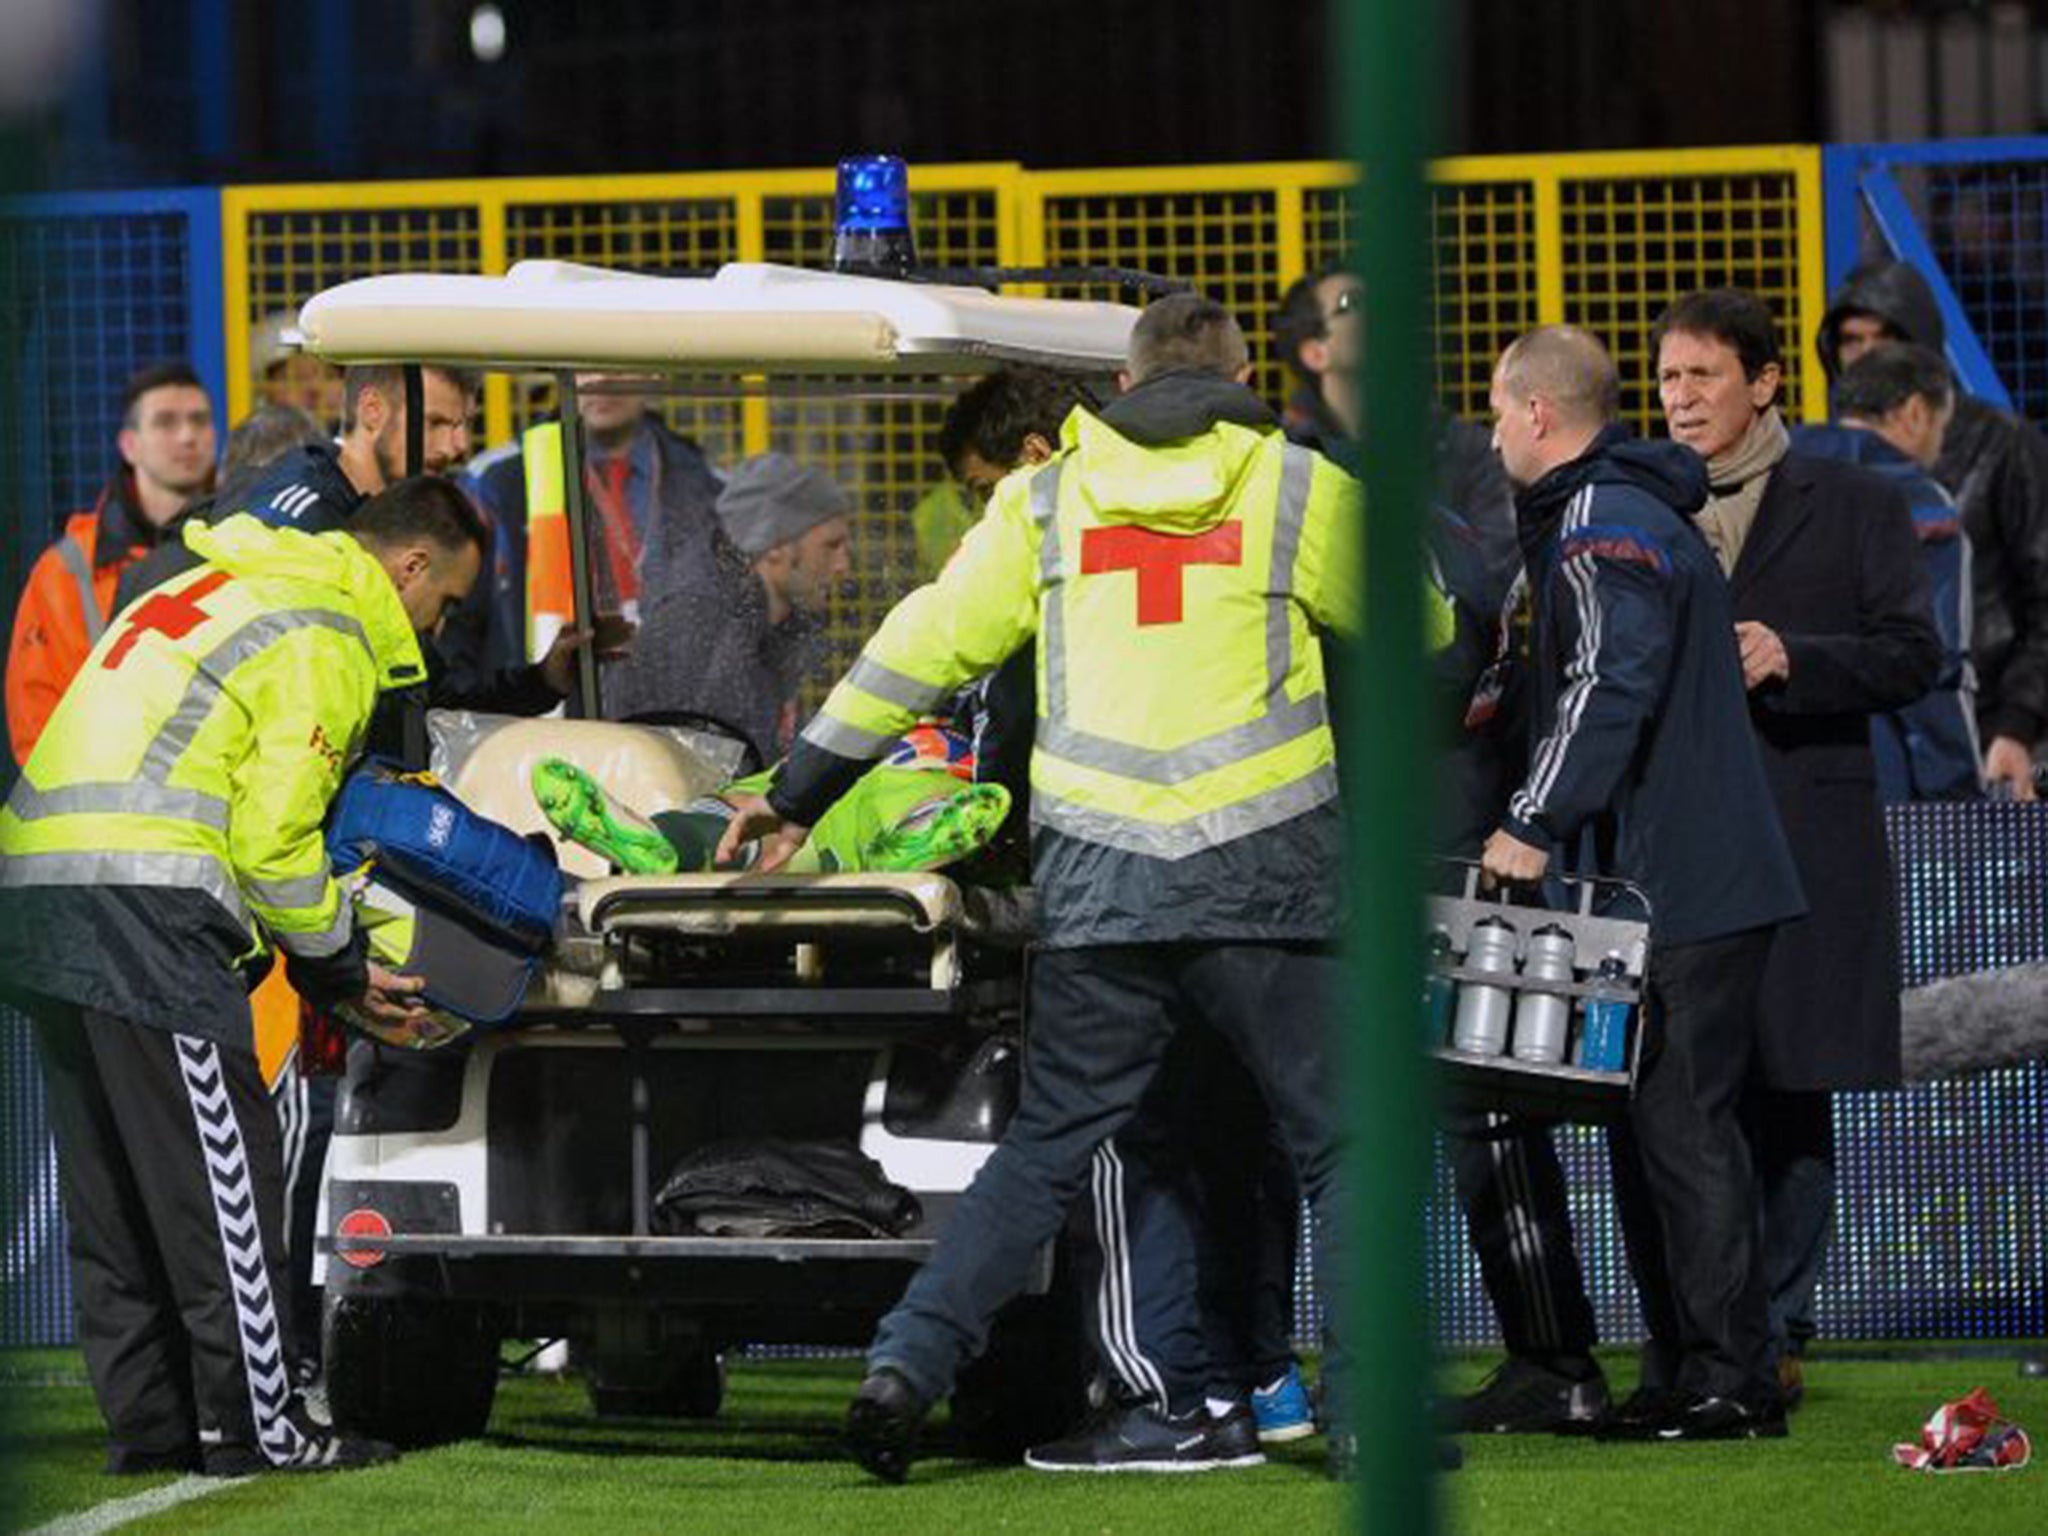 Akinfeev was taken to hospital for further tests